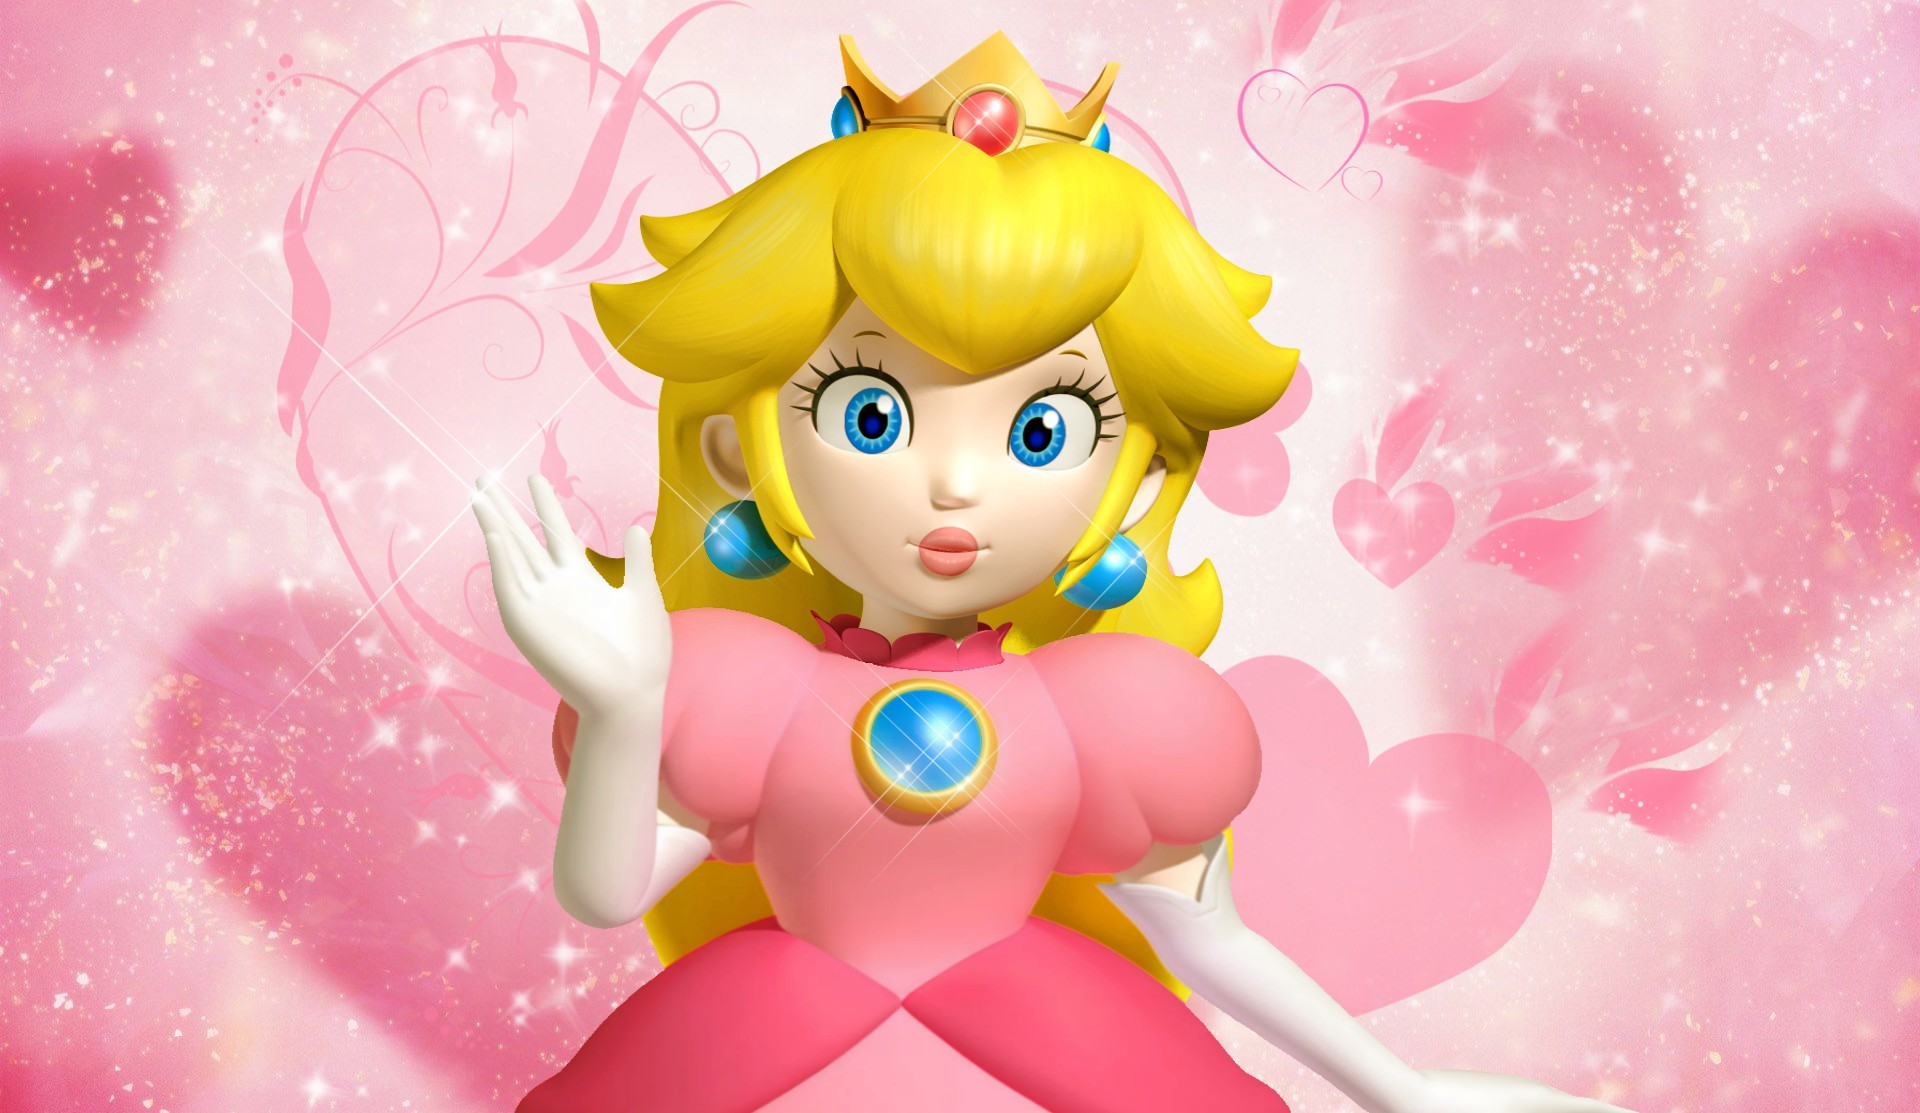 She wears a pink dress and is often getting rescued by Mario, but what else  do you know about Princess Peach? Check out these top ten Princess Peach  facts!